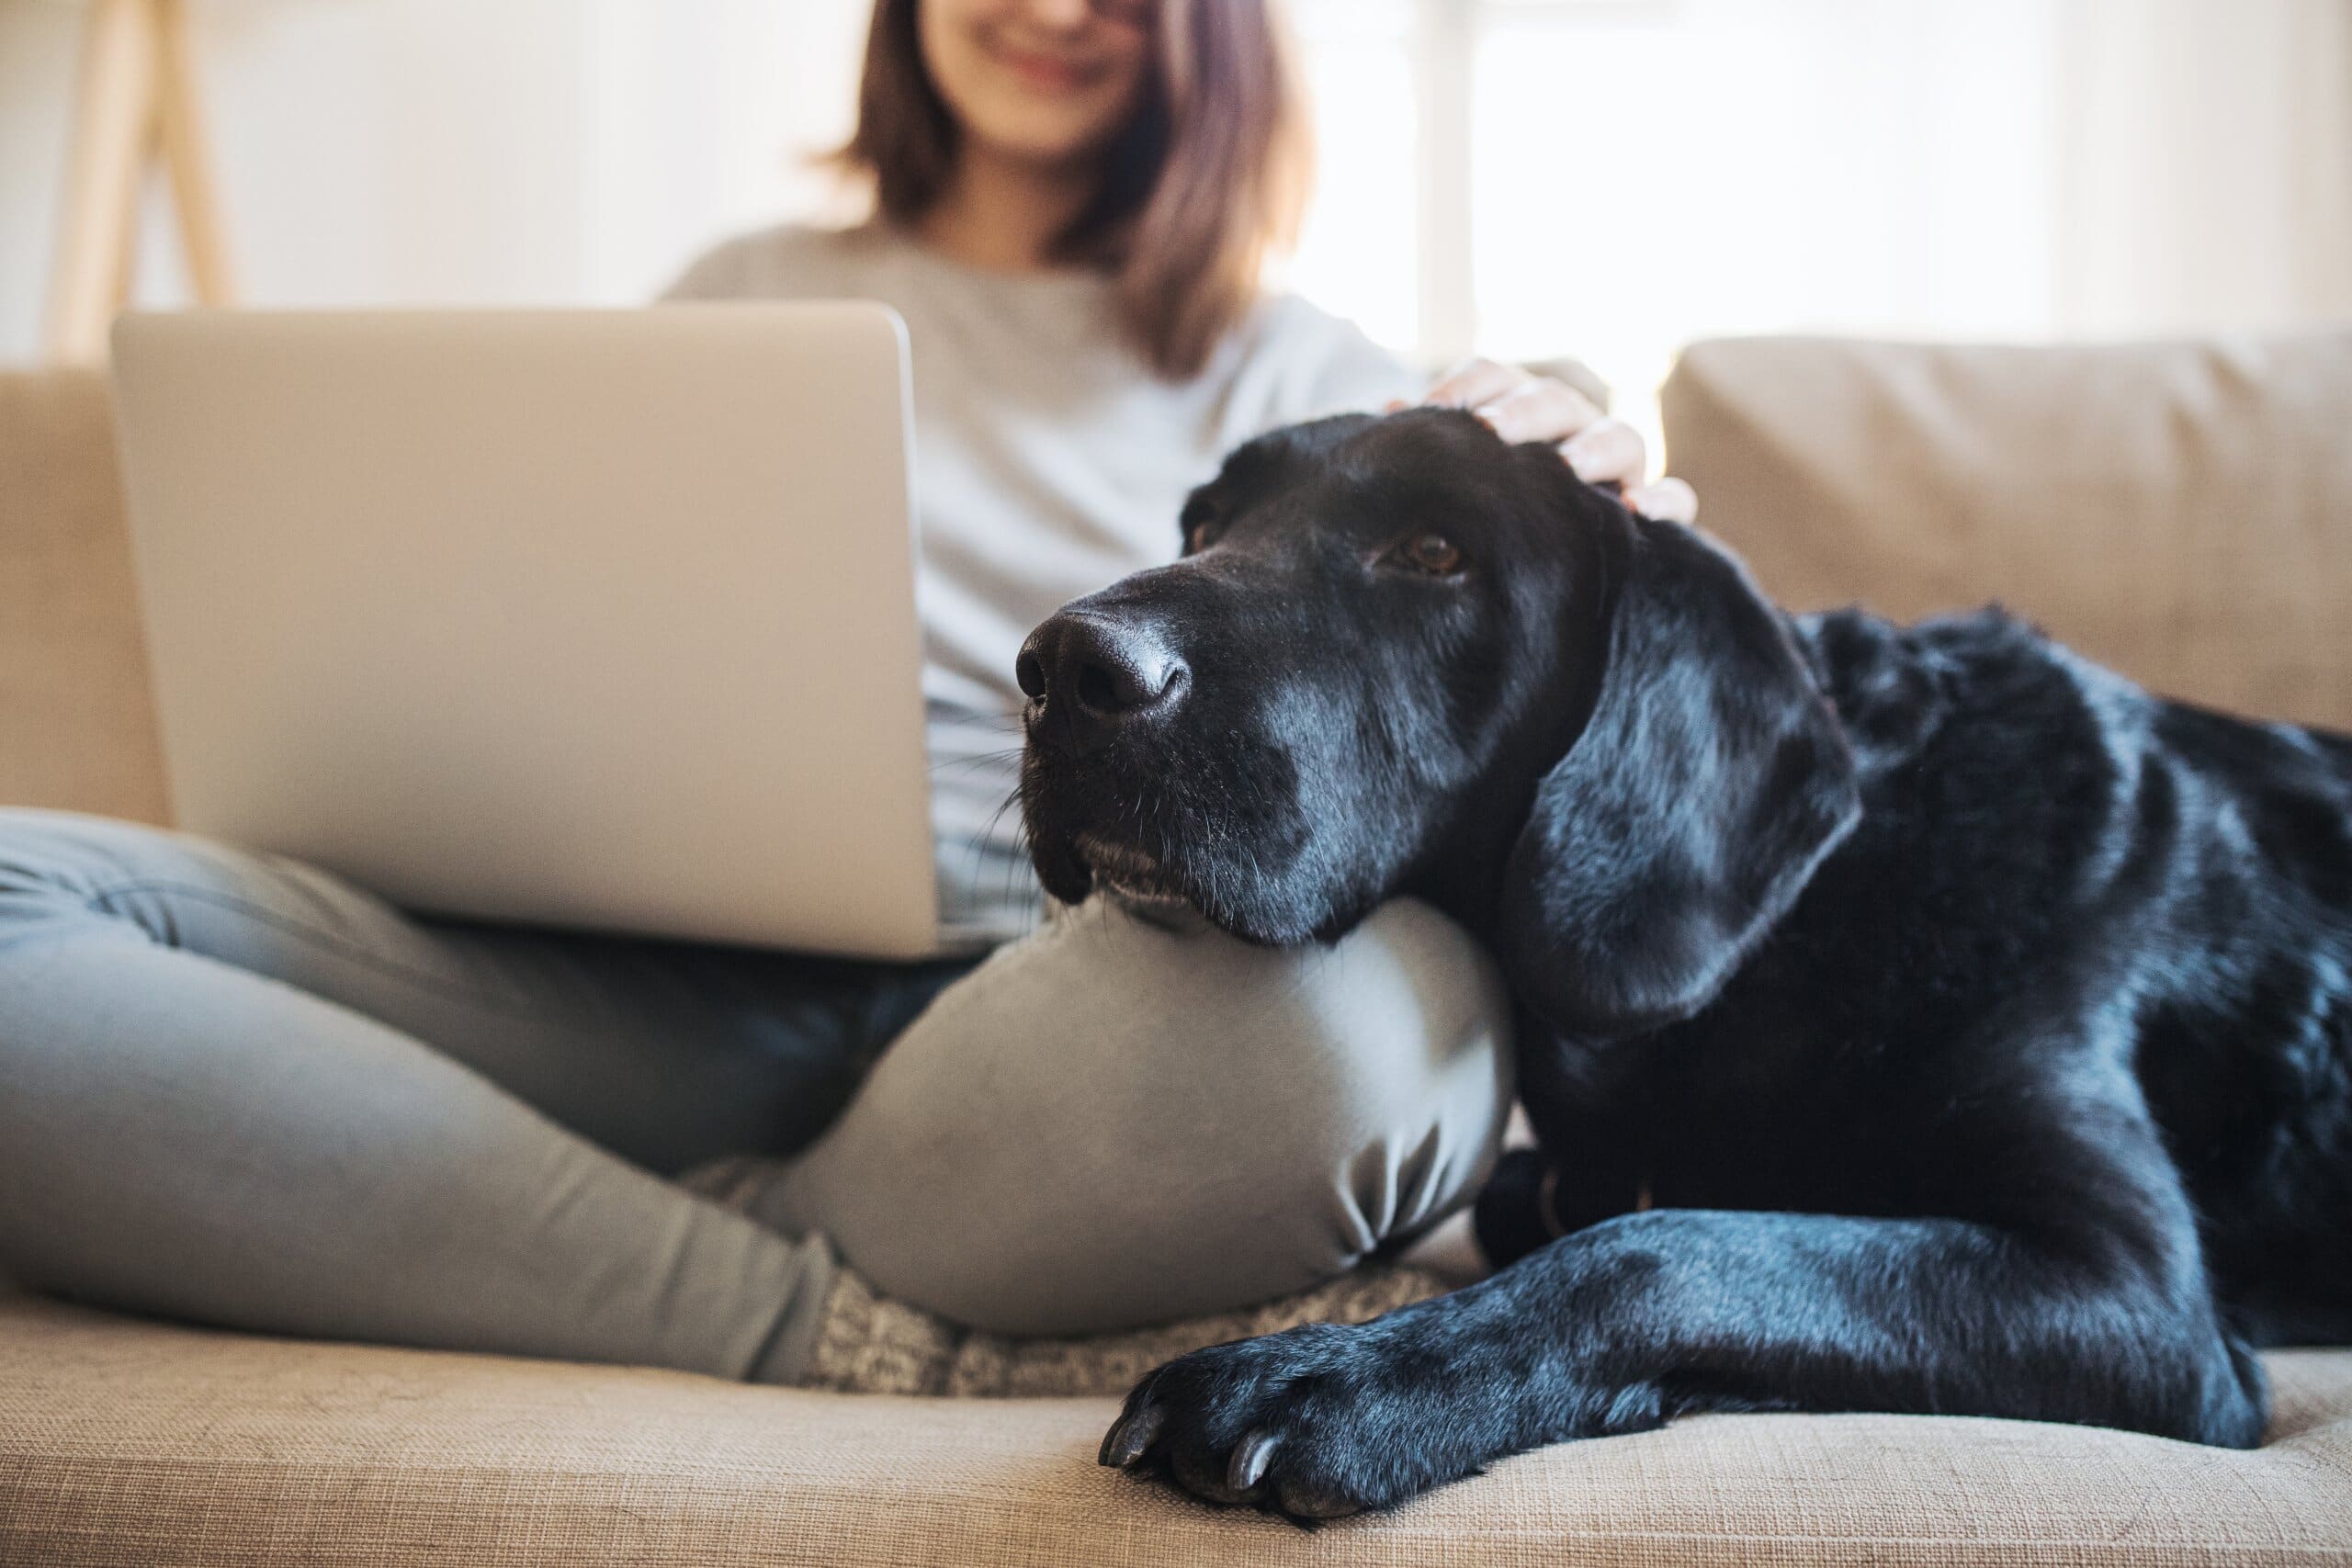 Girl sitting on laptop on sofa with big black labrador resting on her knee.